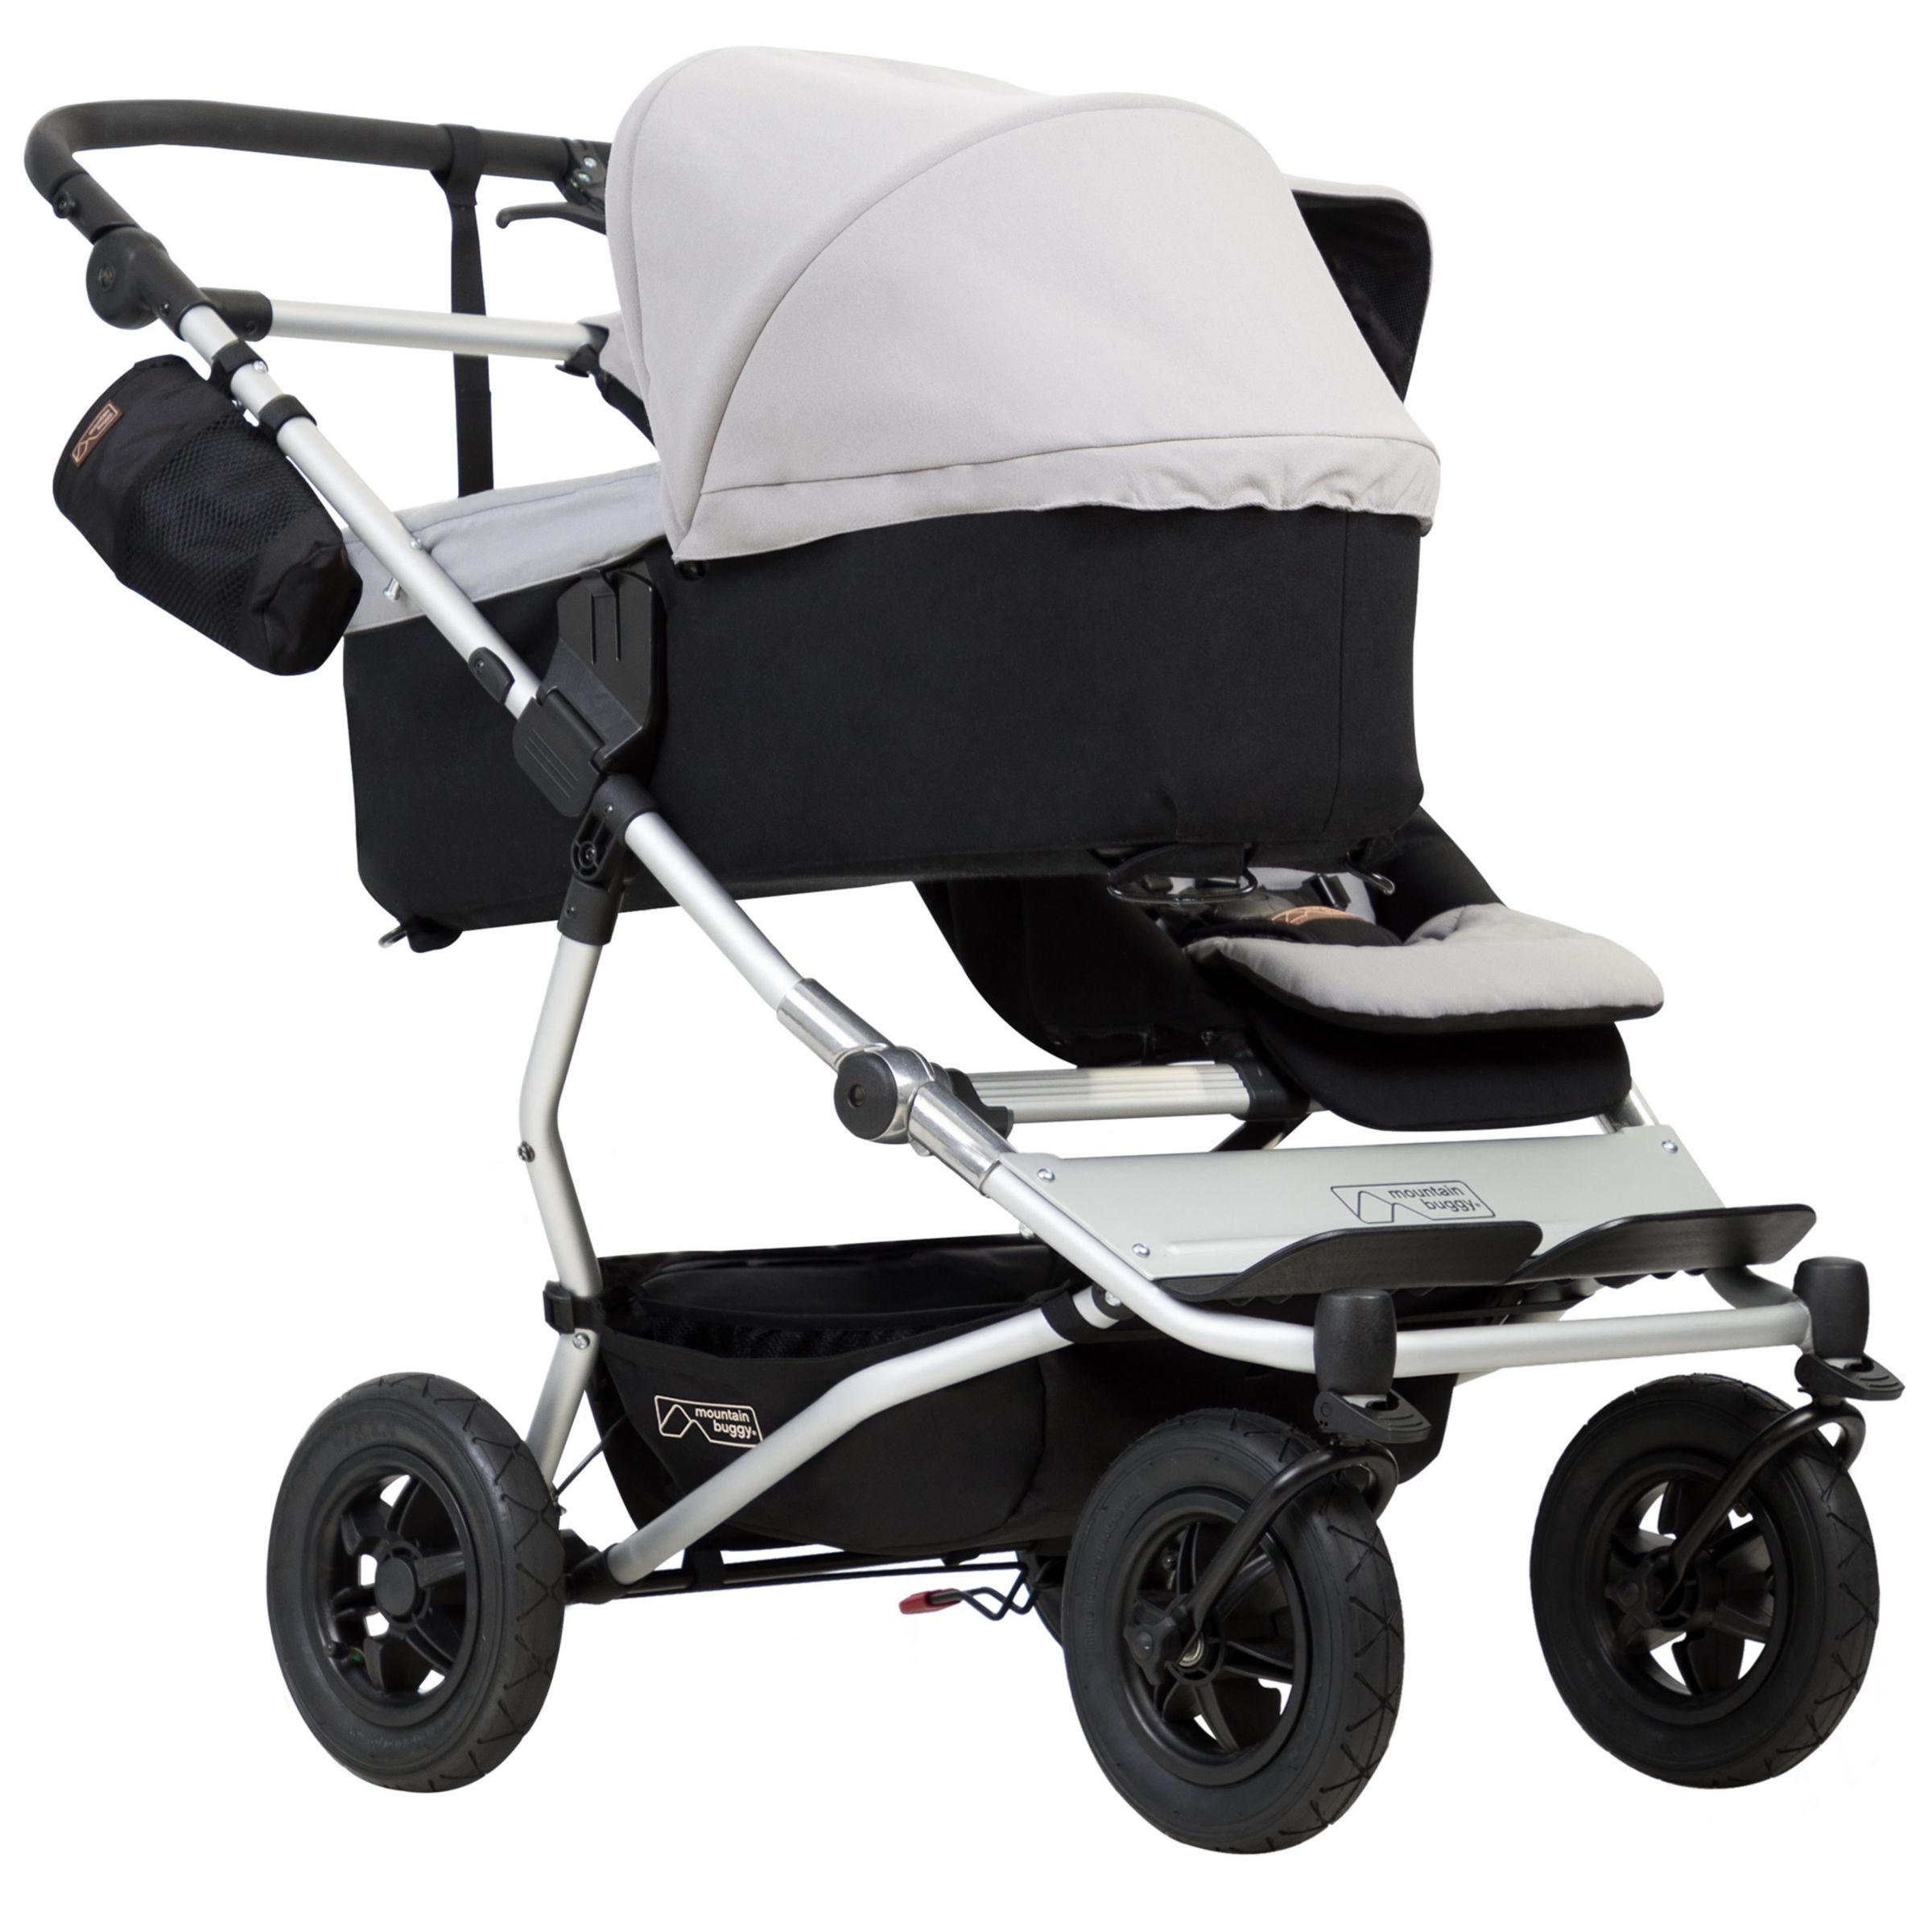 mountain buggy duet v3 with carrycot